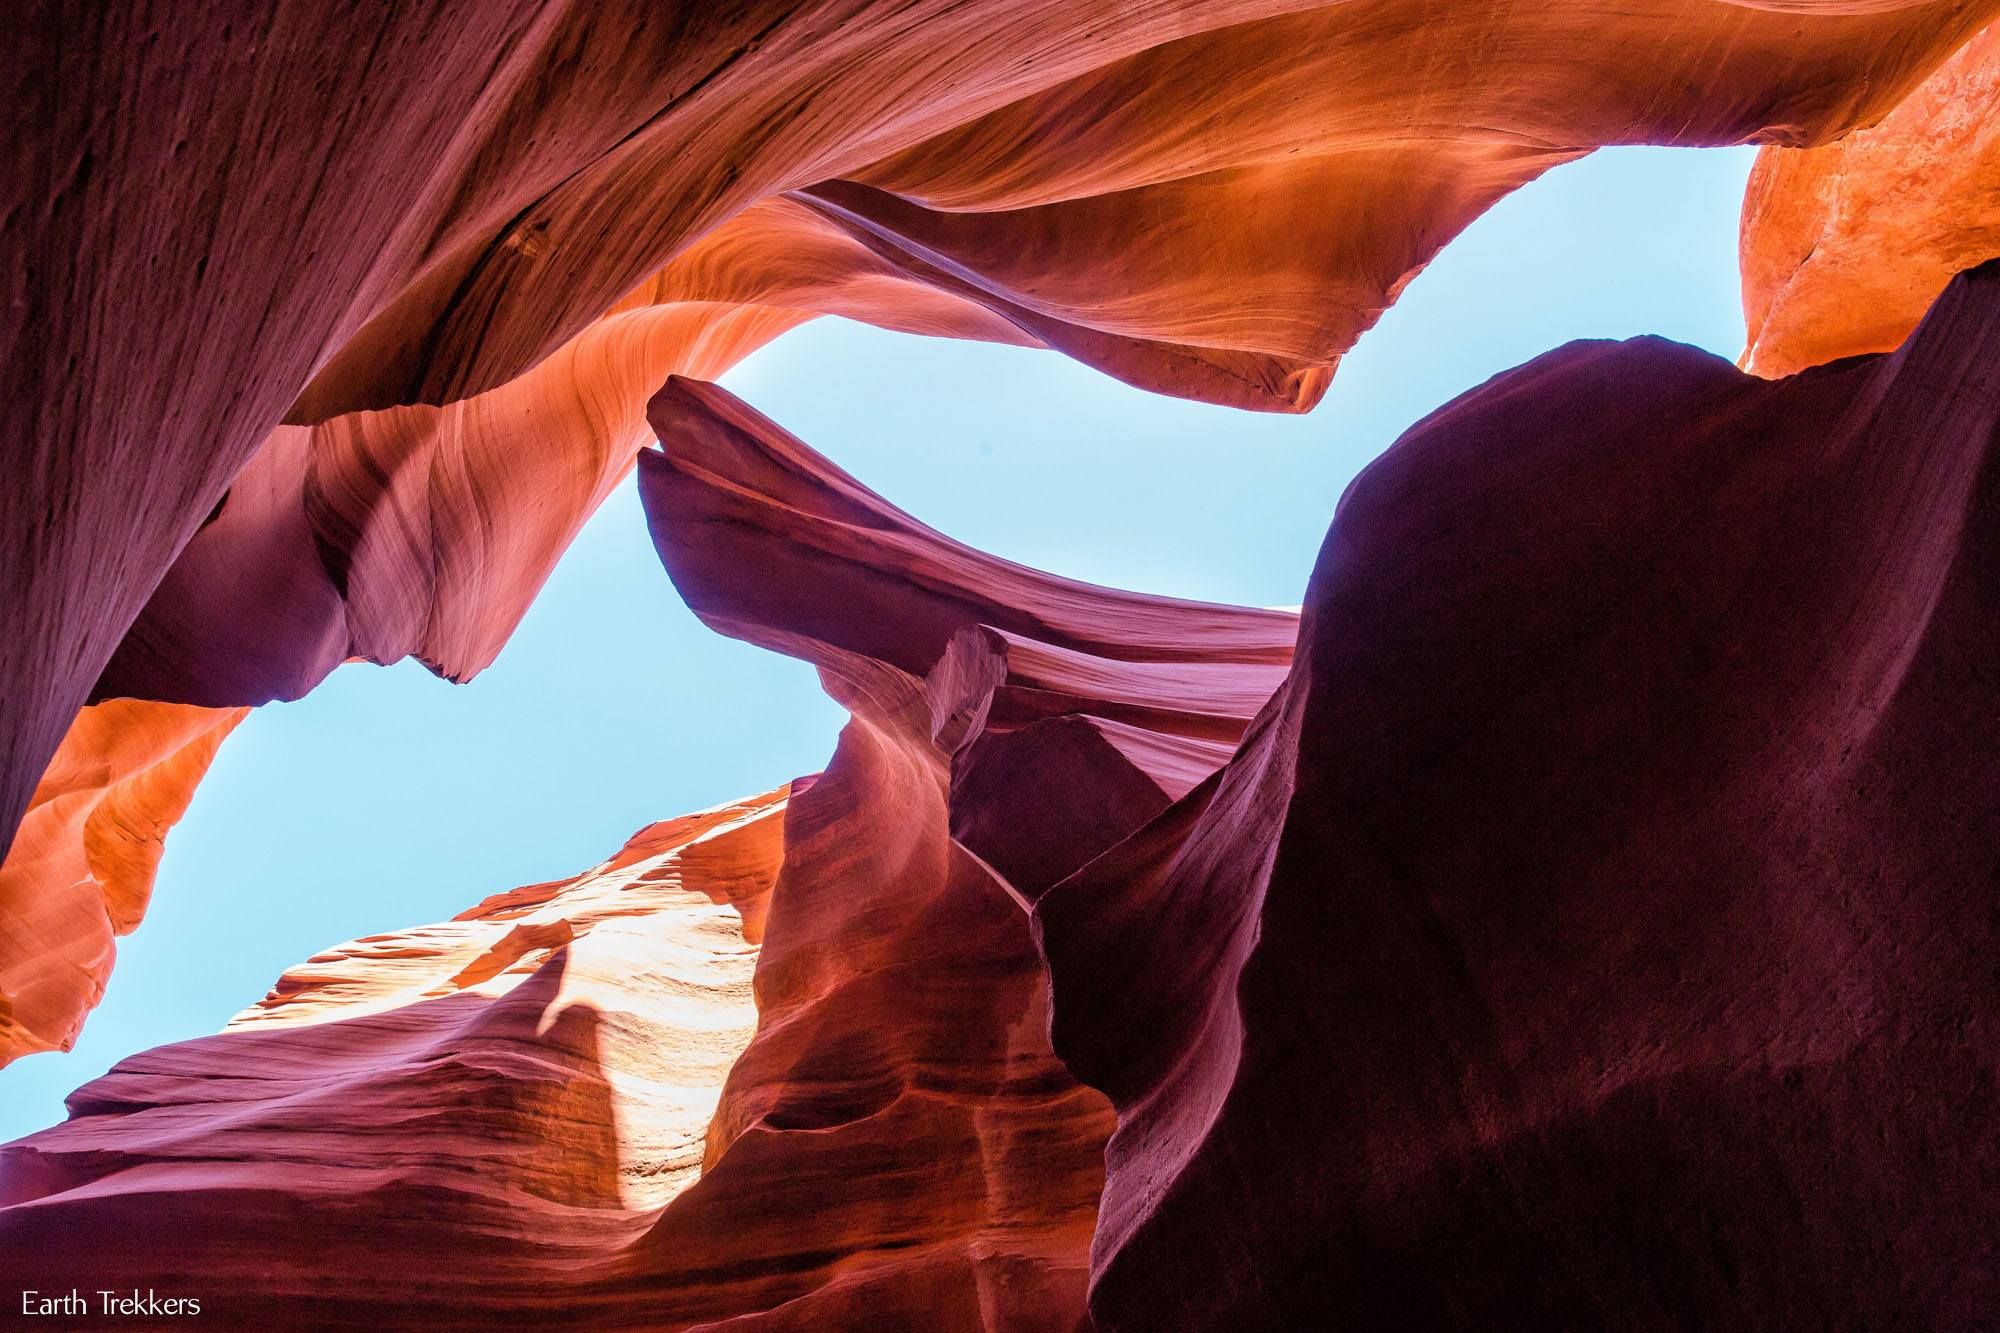 Lower Antelope Canyon: A Photographic Tour | Earth Trekkers